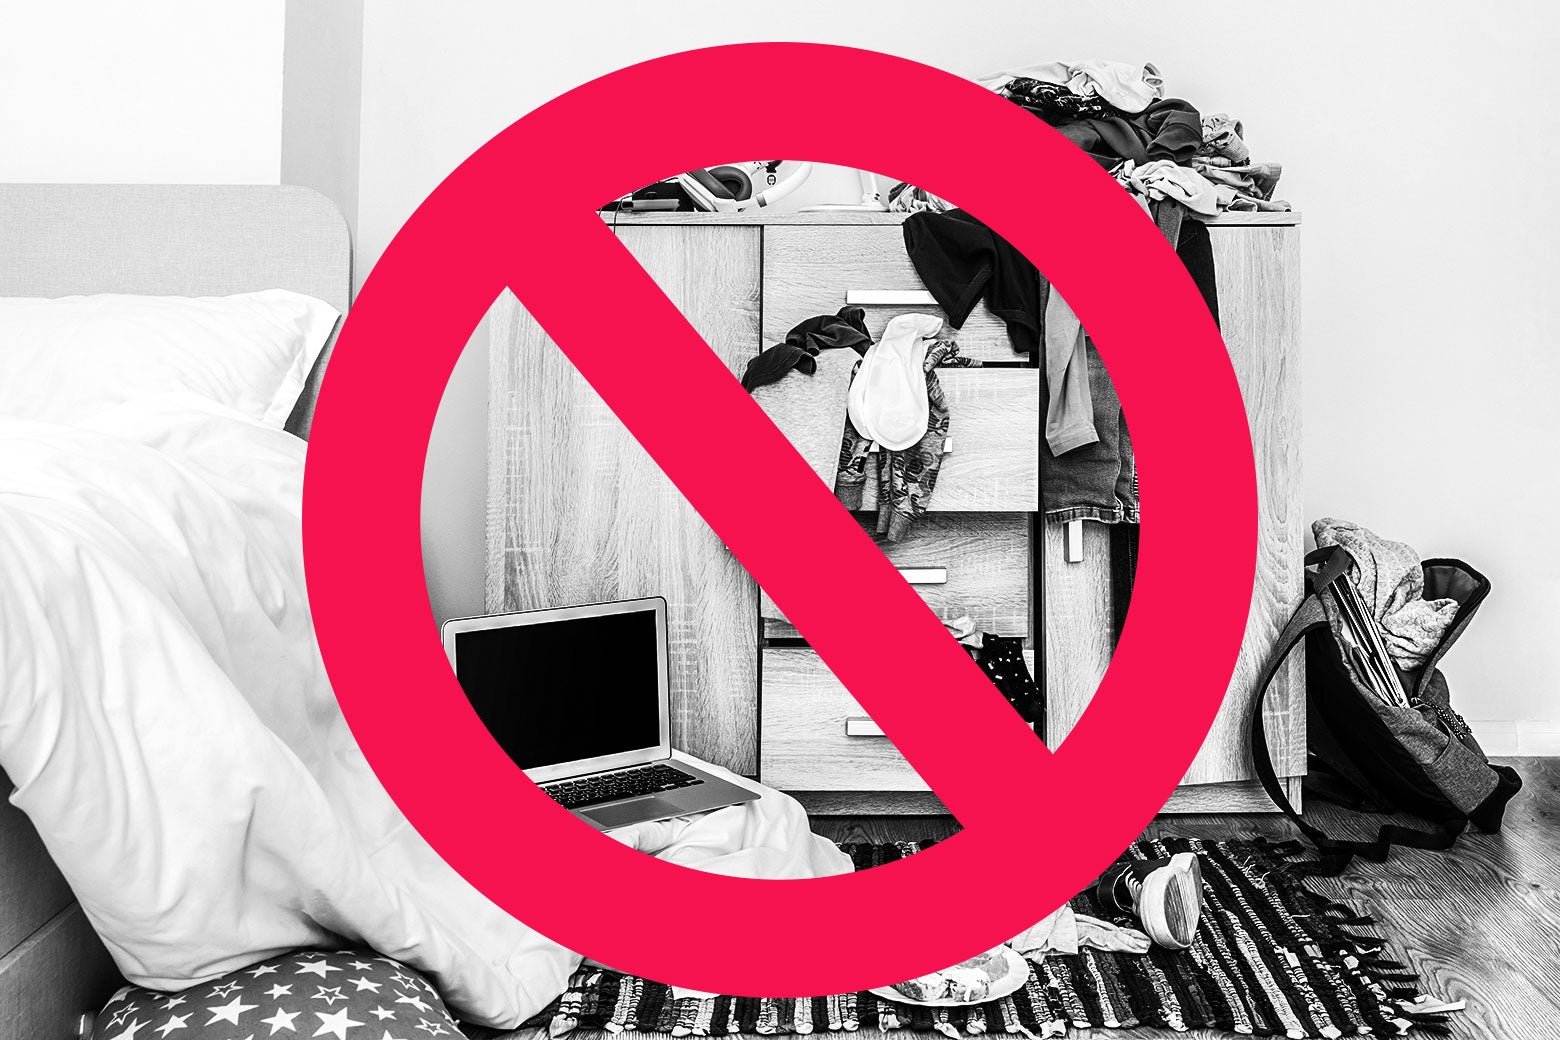 A messy room is covered over by a no entry symbol.